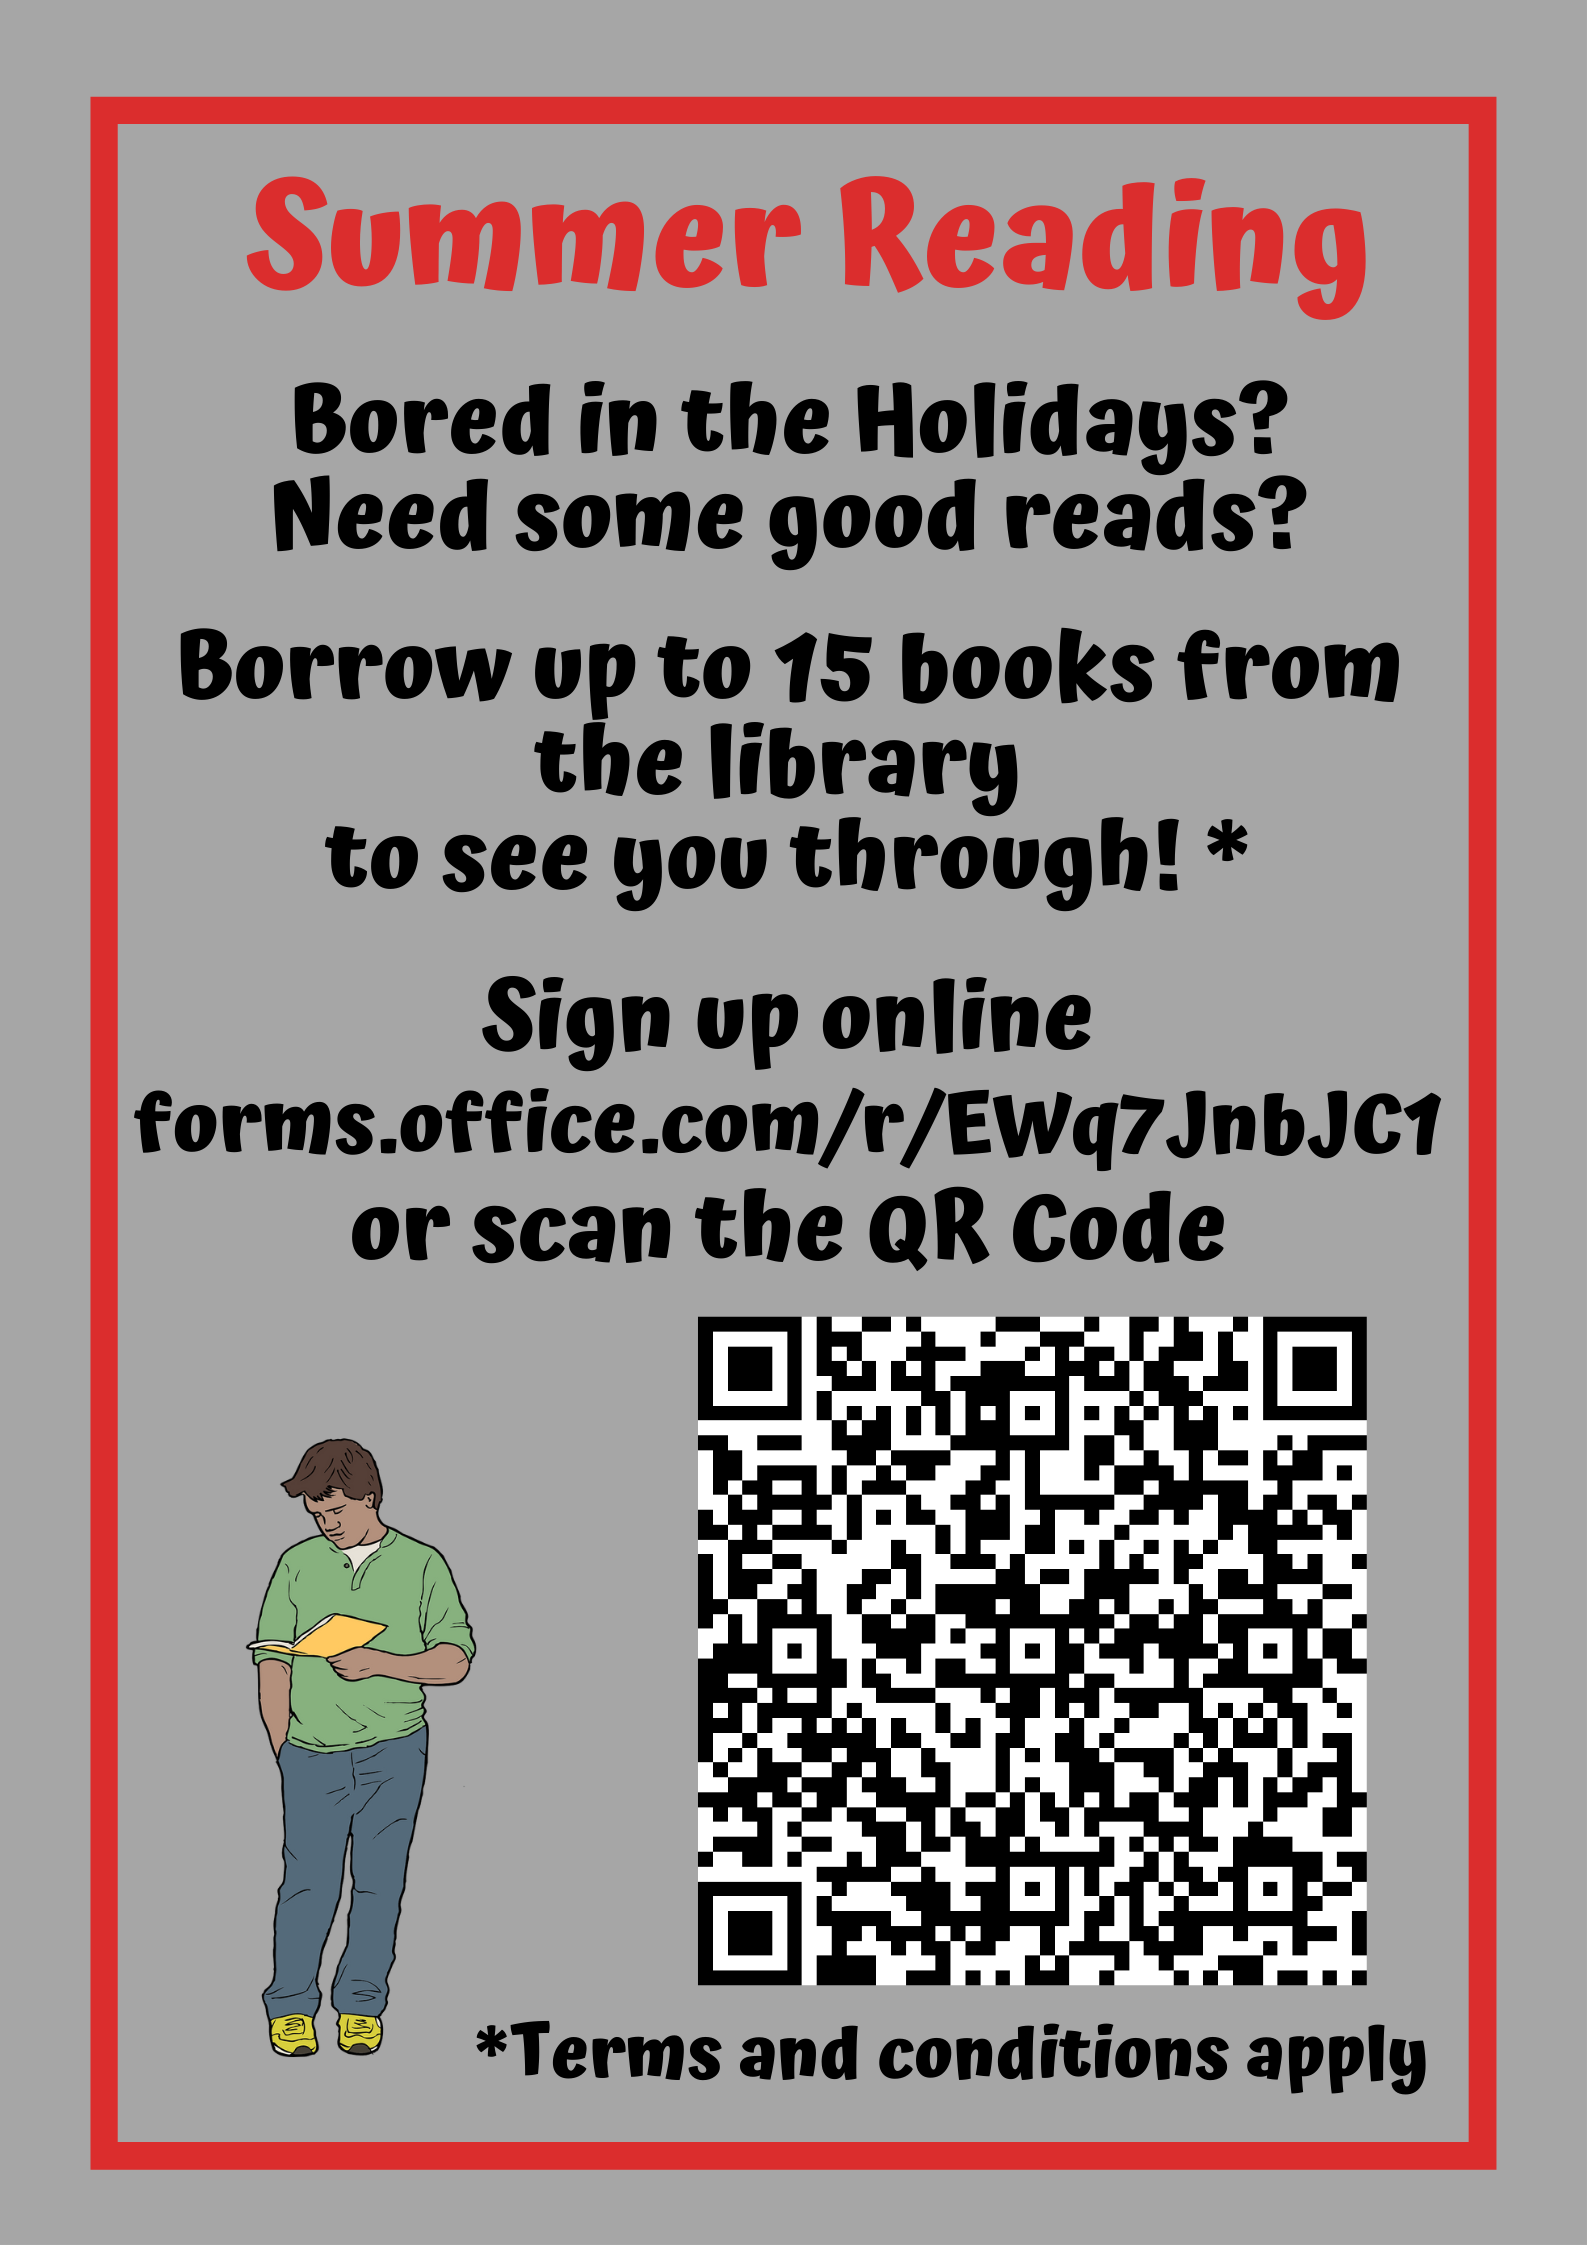 Library Books for holidays